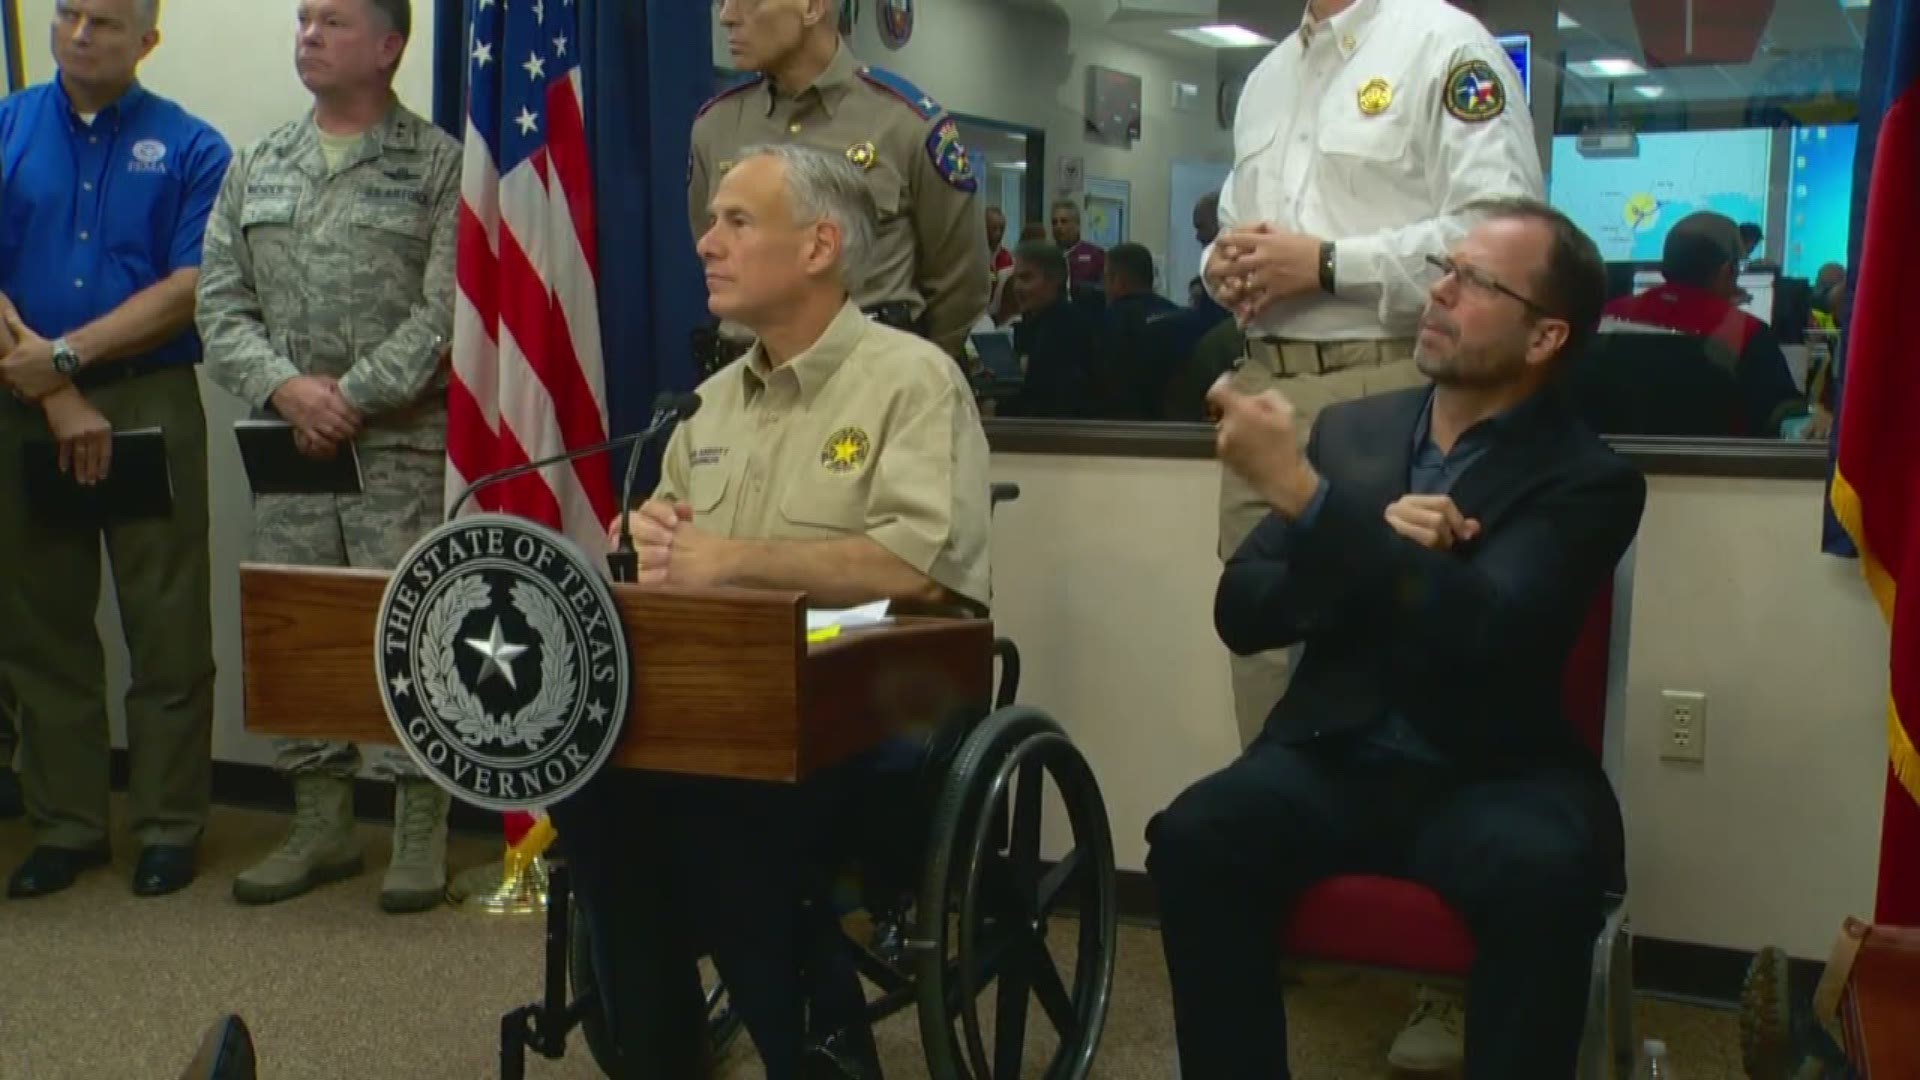 Texas Governor Greg Abbott speaks at a press conference on Hurricane Harvey